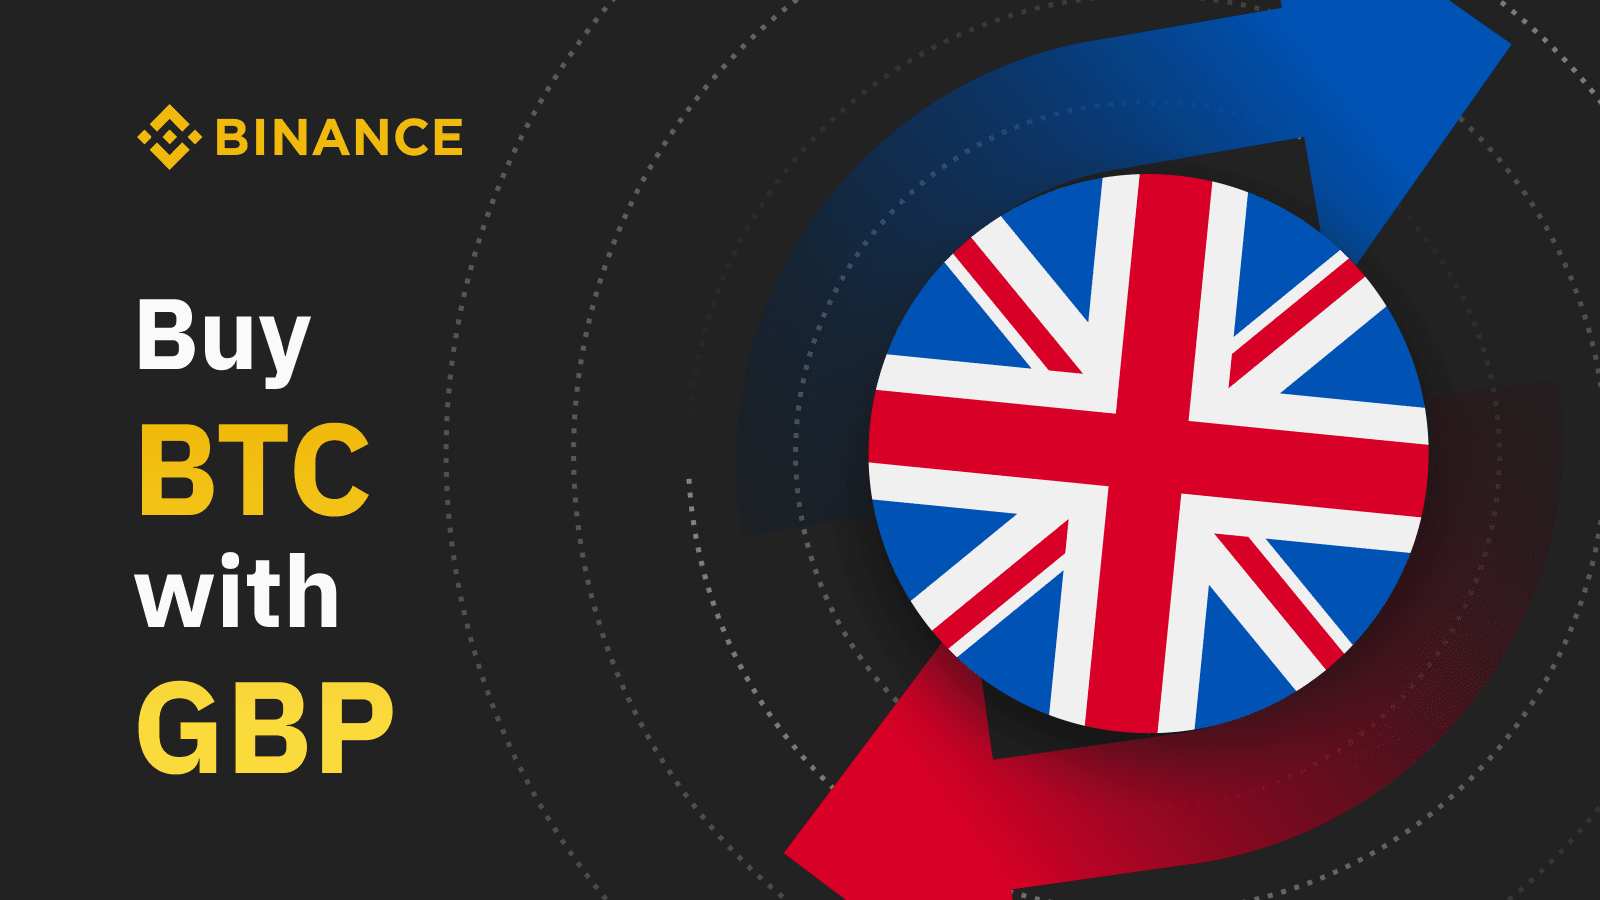 10 Best Crypto Exchanges UK - Top Crypto Trading Platforms